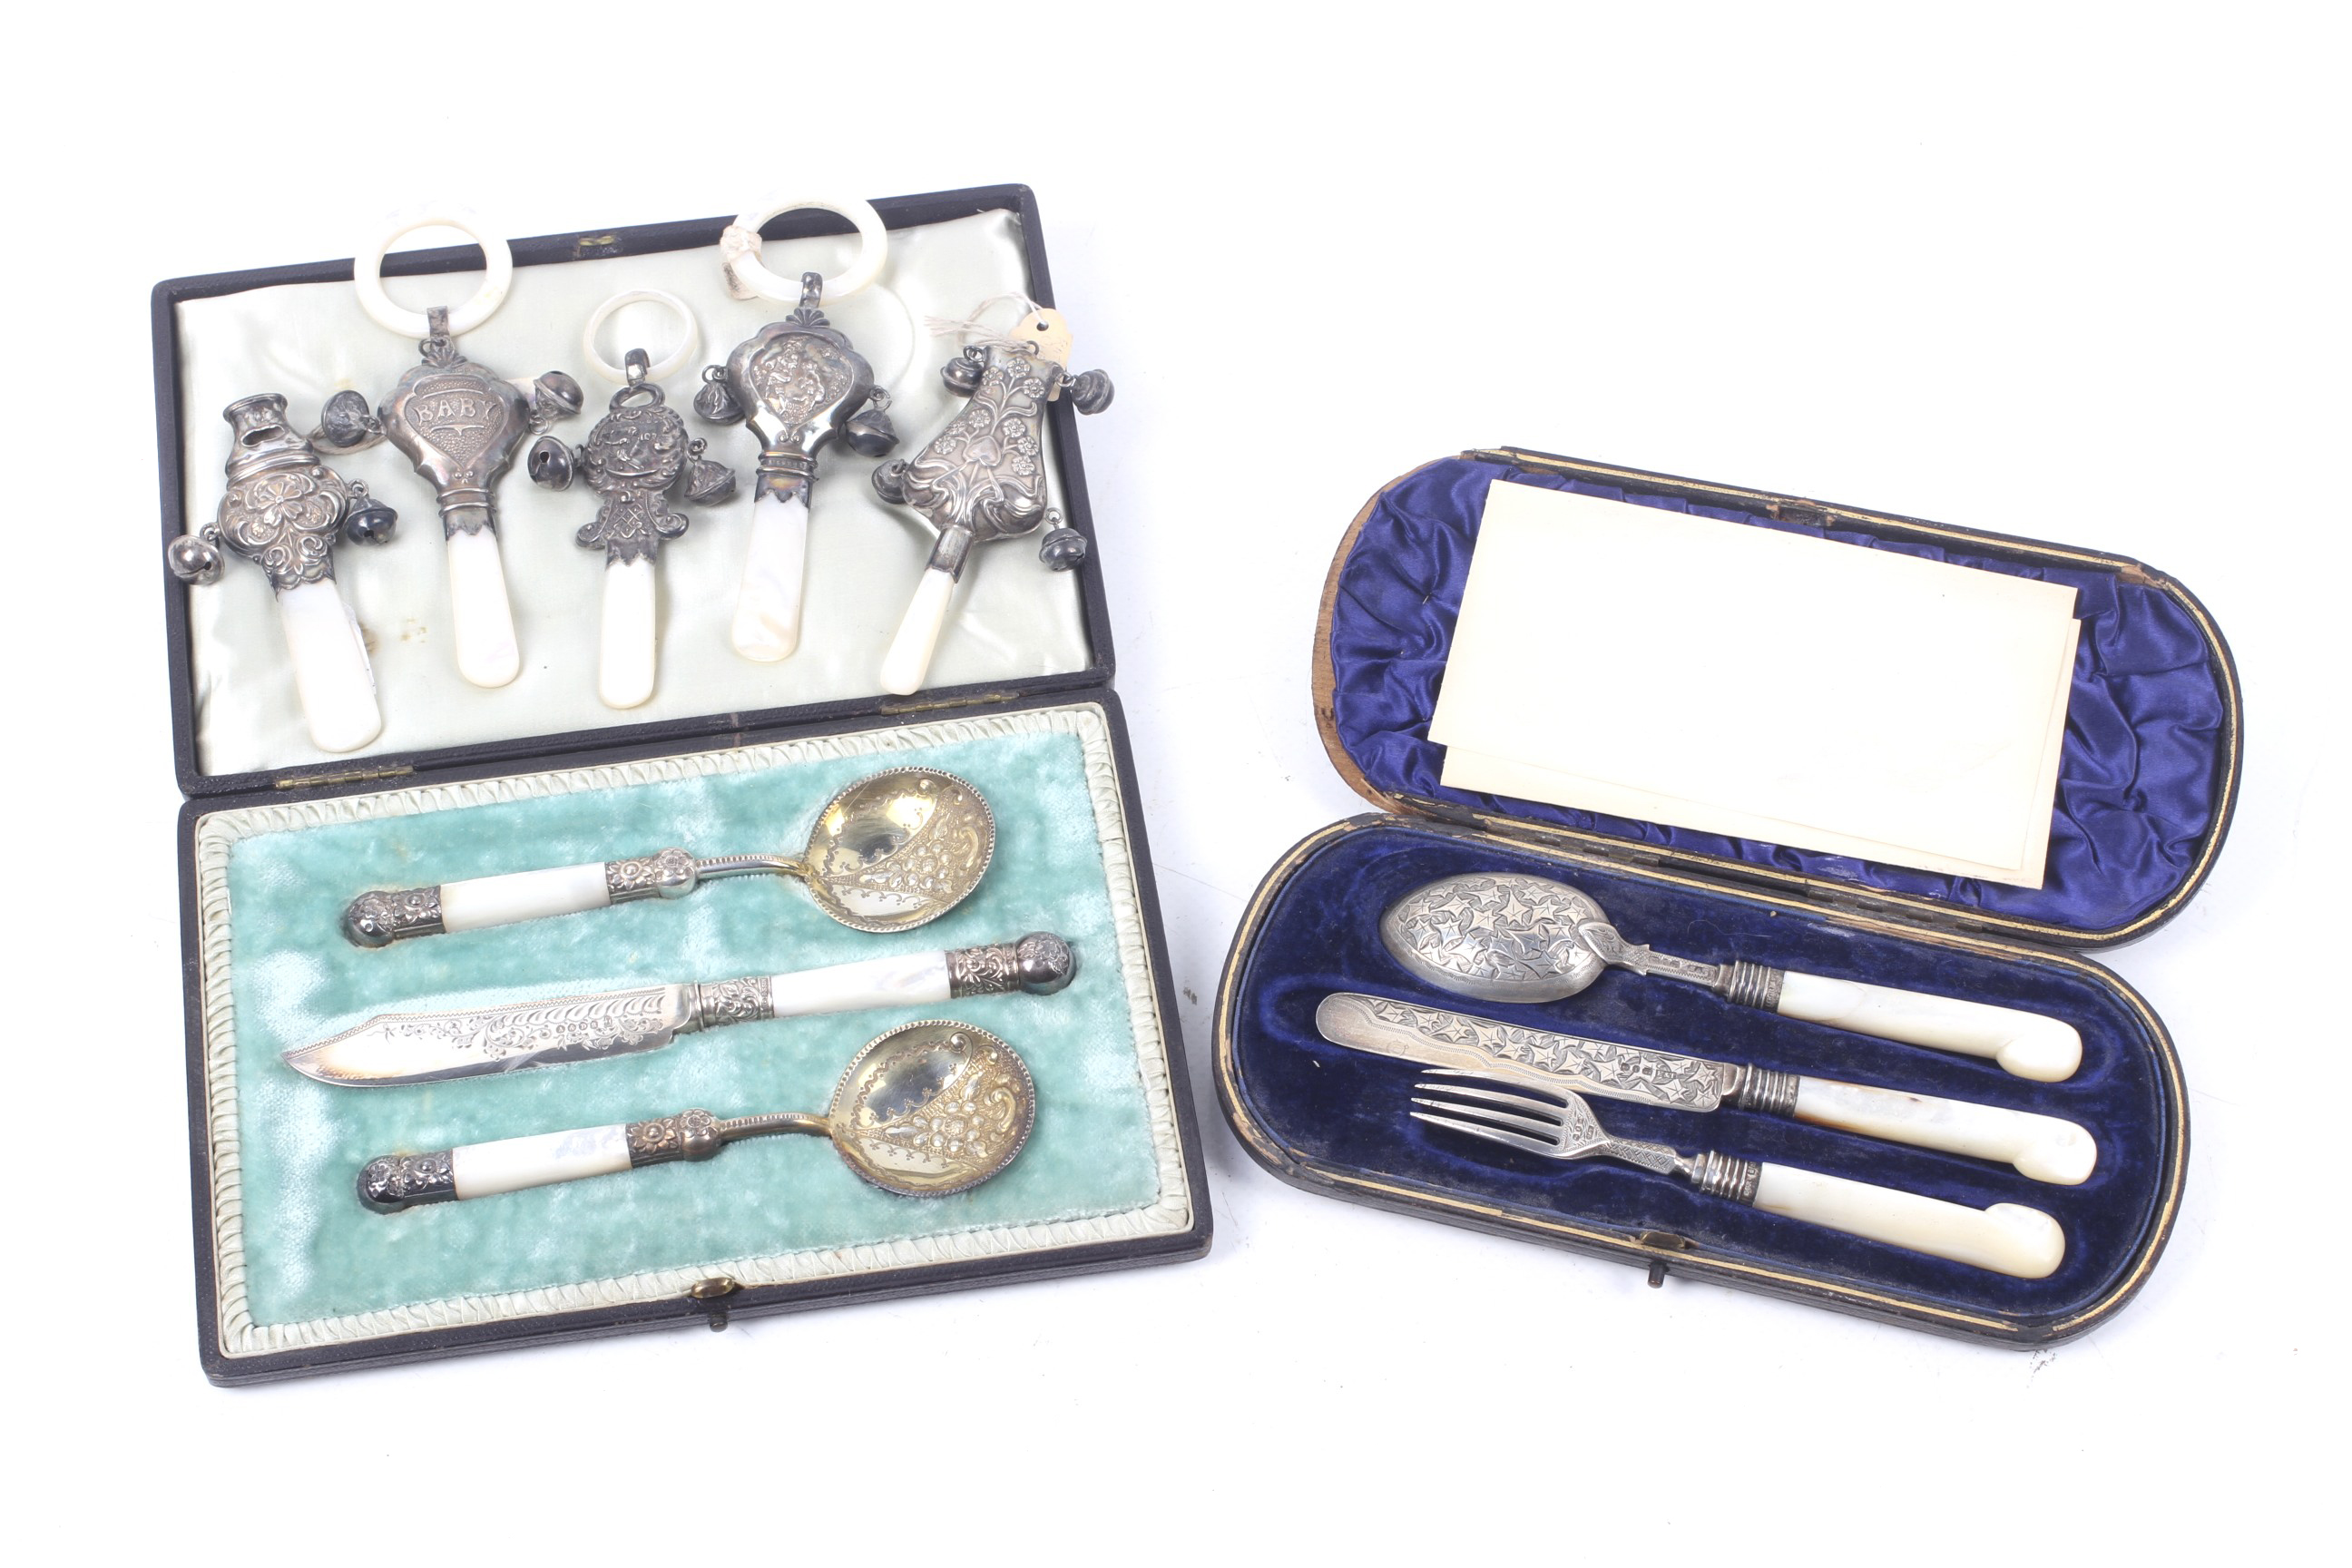 Five various early 20th century baby's silver and mother of pearl rattles/teethers and other items.